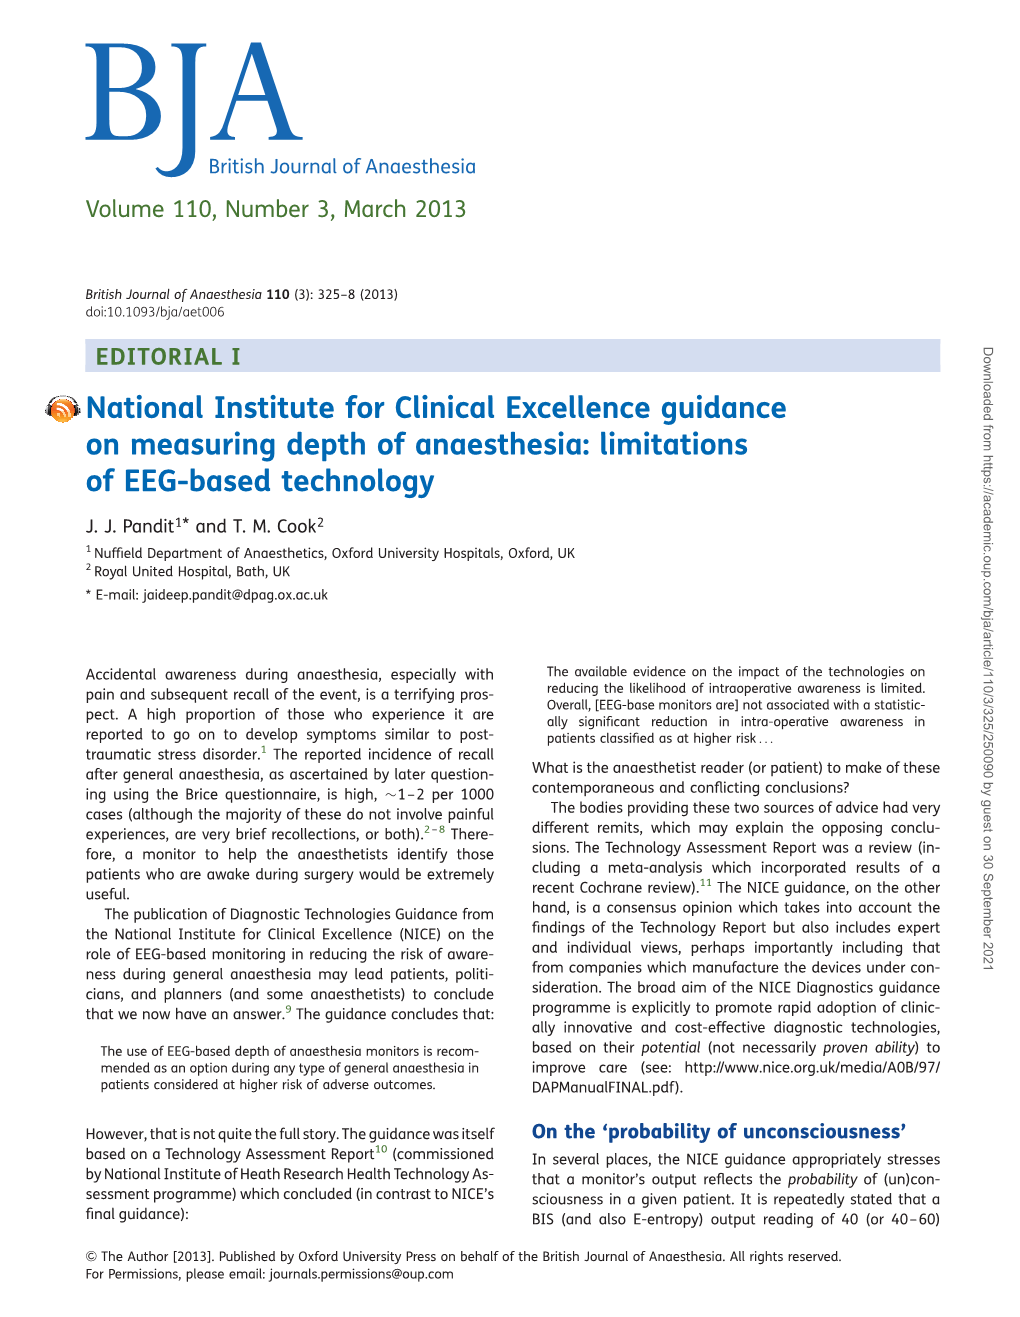 National Institute for Clinical Excellence Guidance on Measuring Depth of Anaesthesia: Limitations of EEG-Based Technology